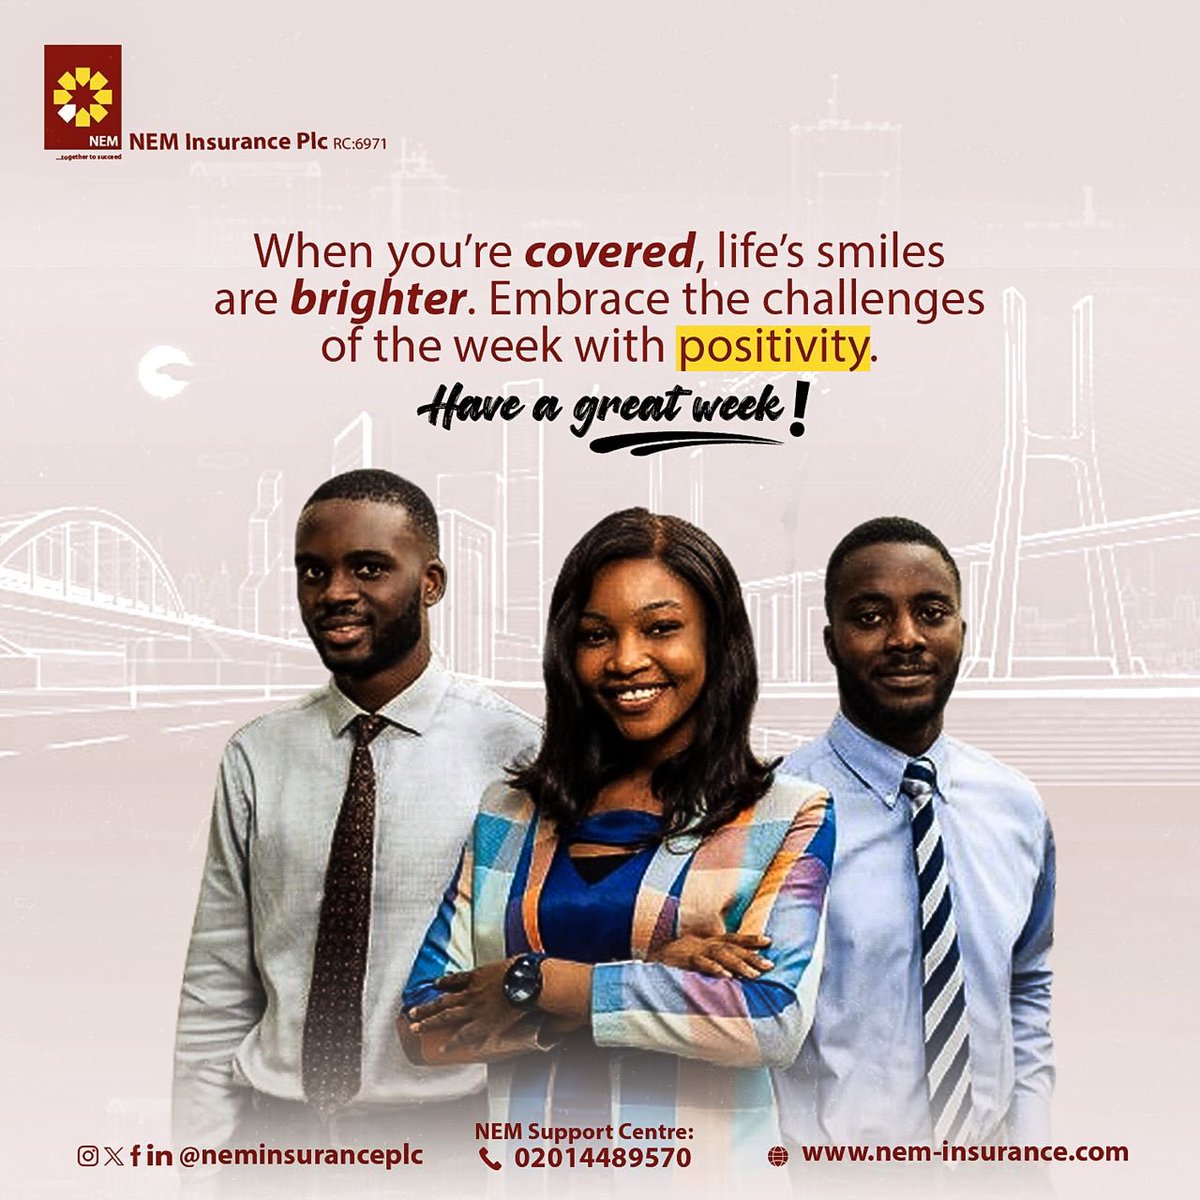 Protected and Covered, let’s tackle the week ahead with a smile and unwavering positivity! 💪 #MondayMotivation #NEMInsurancePlc #BeNEMSure